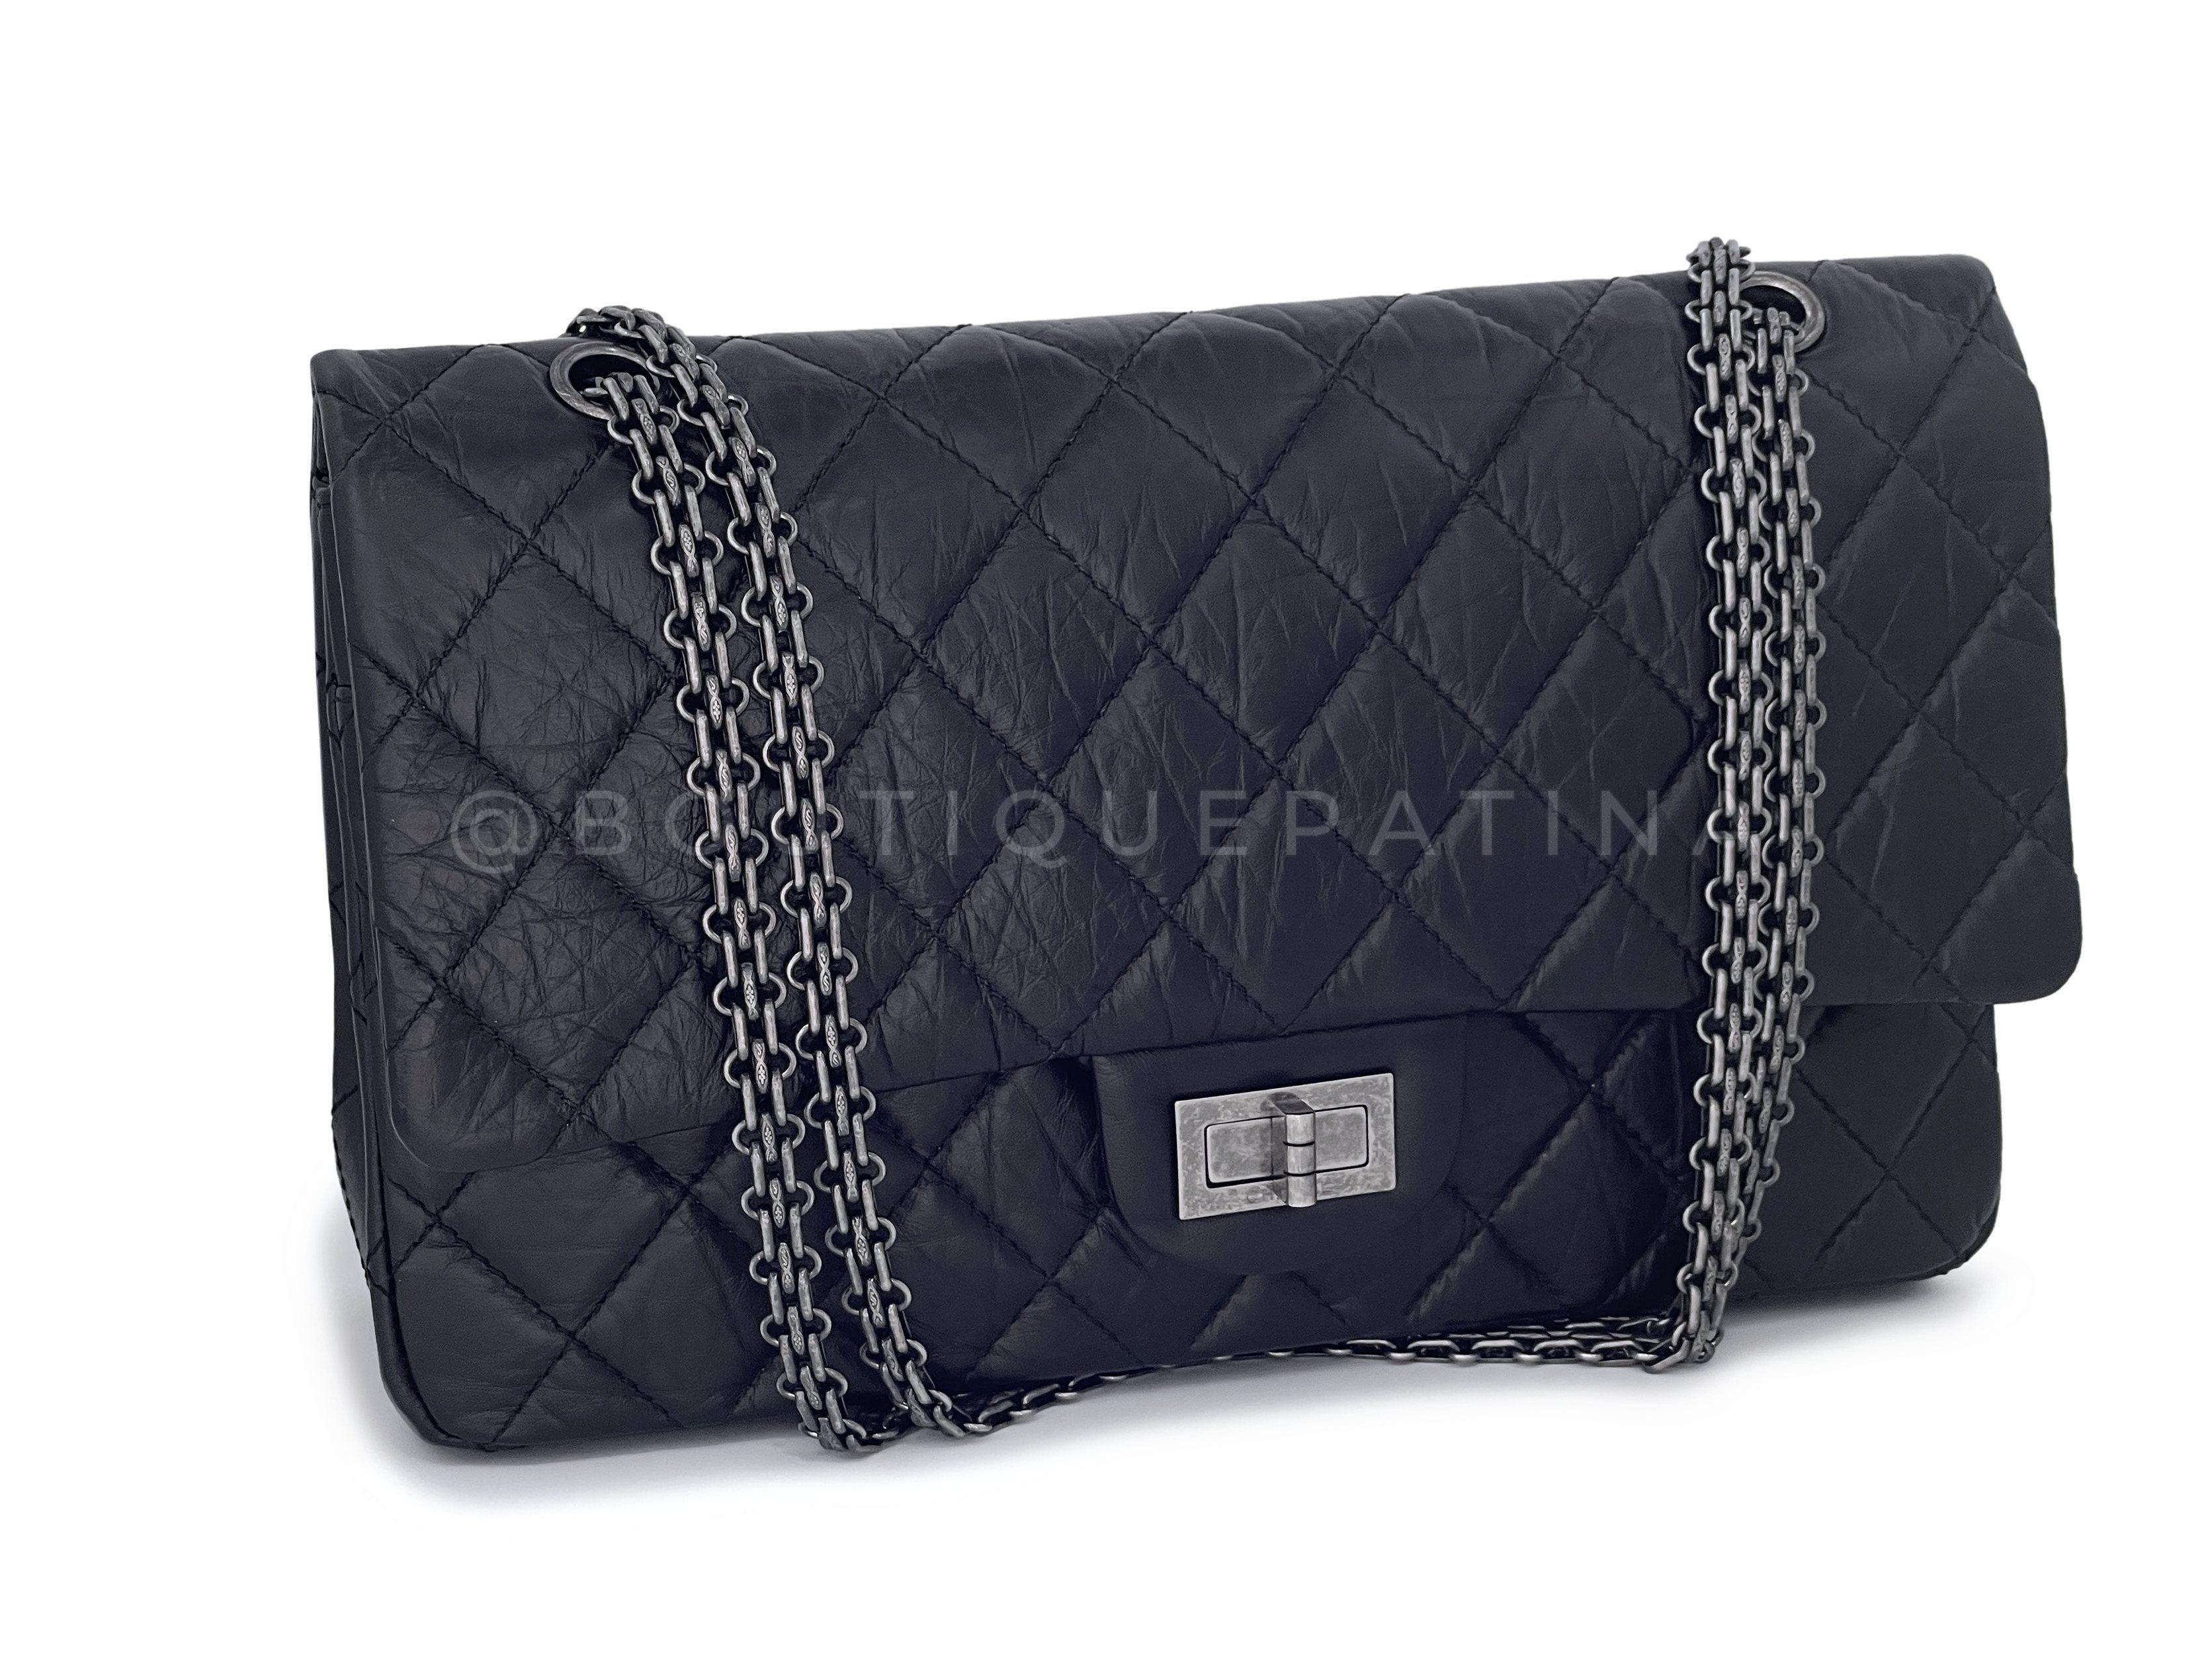 Store item: 64730
The reissue ligne is known and coveted by Chanel lovers as the original Chanel classic model, before the interlocking CC's were released. The rectangular mademoiselle lock, quilted aged calfskin and aged bijoux chain are hallmarks